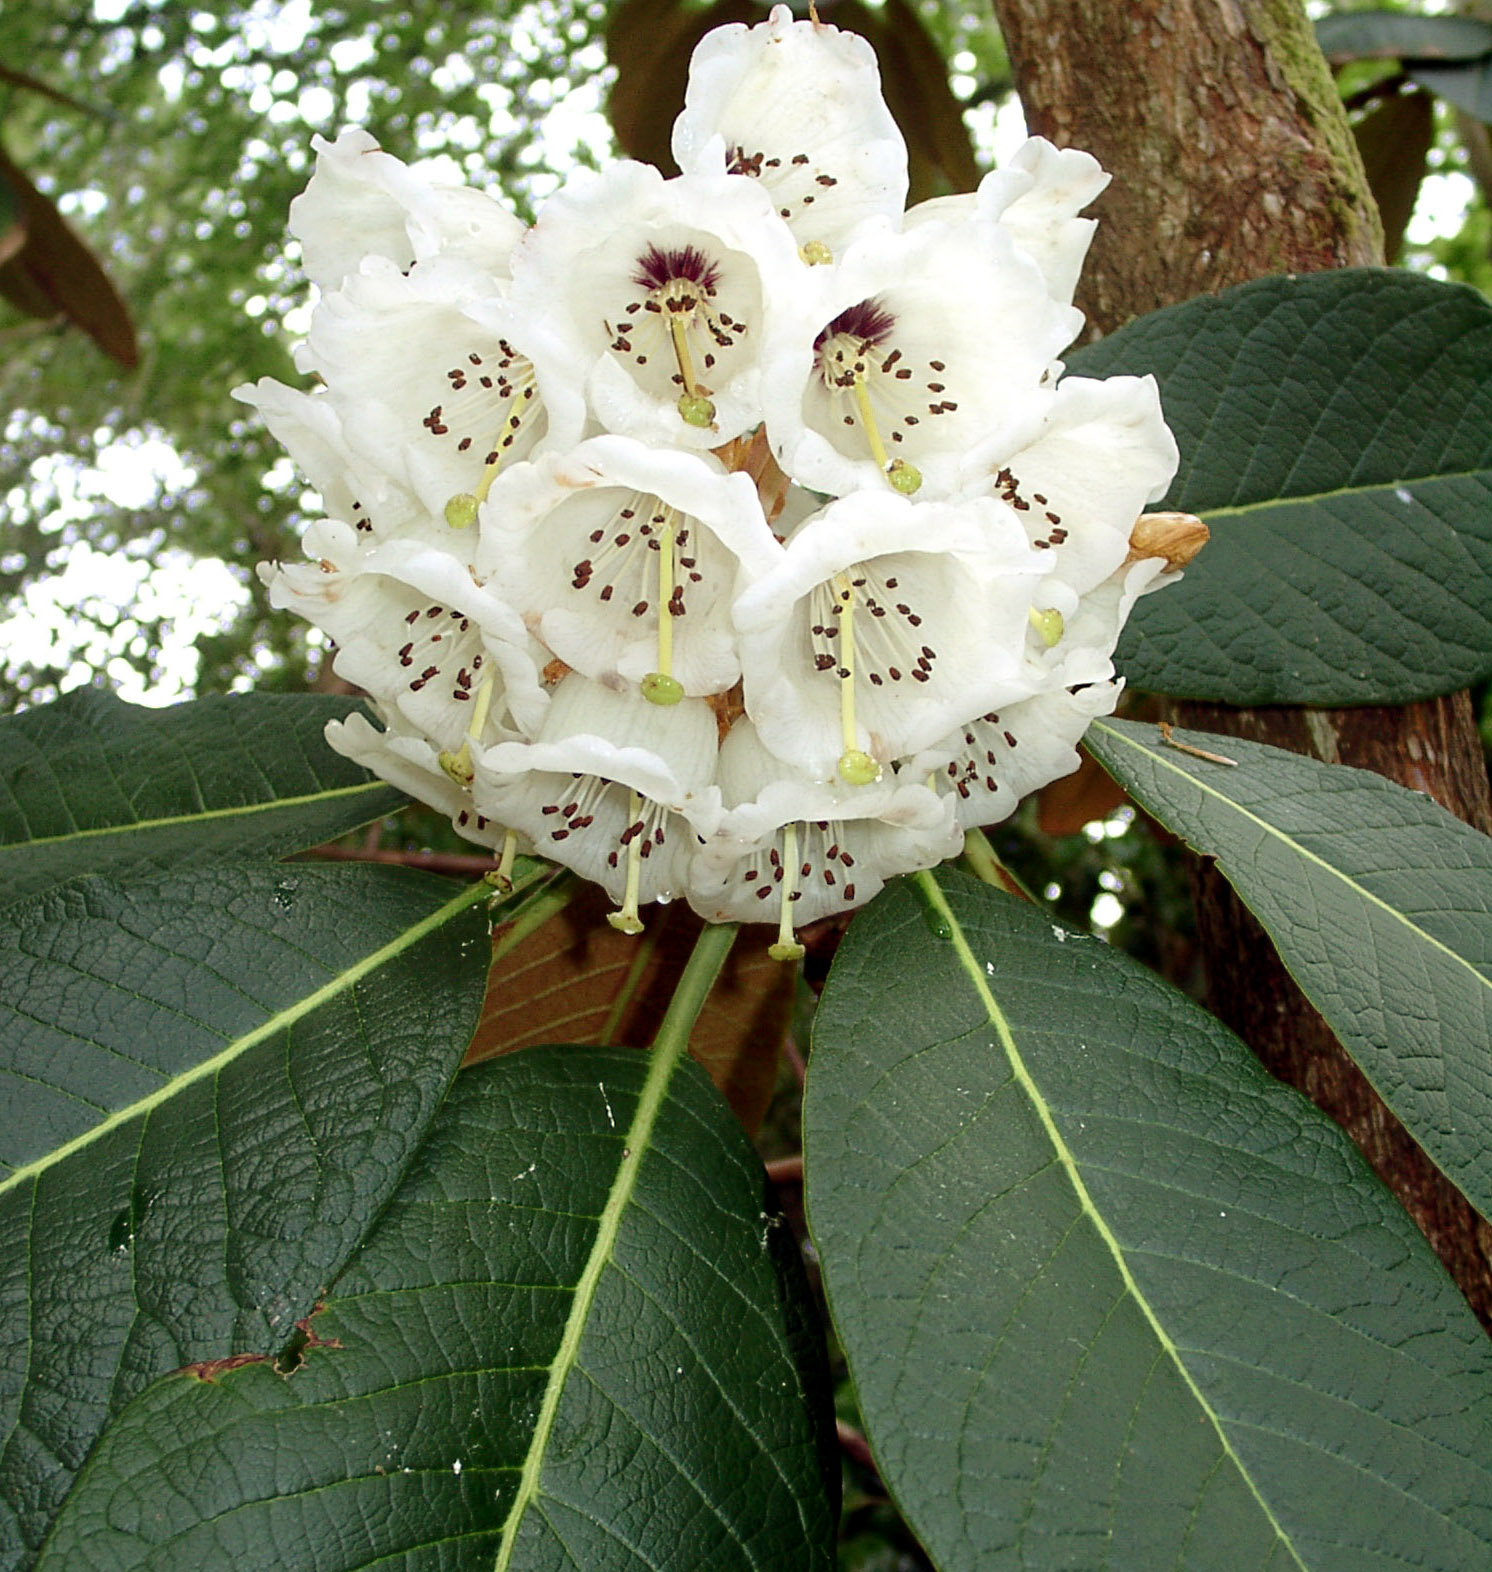 FALCONERI Rhododendron Larger Species Rhododendrons